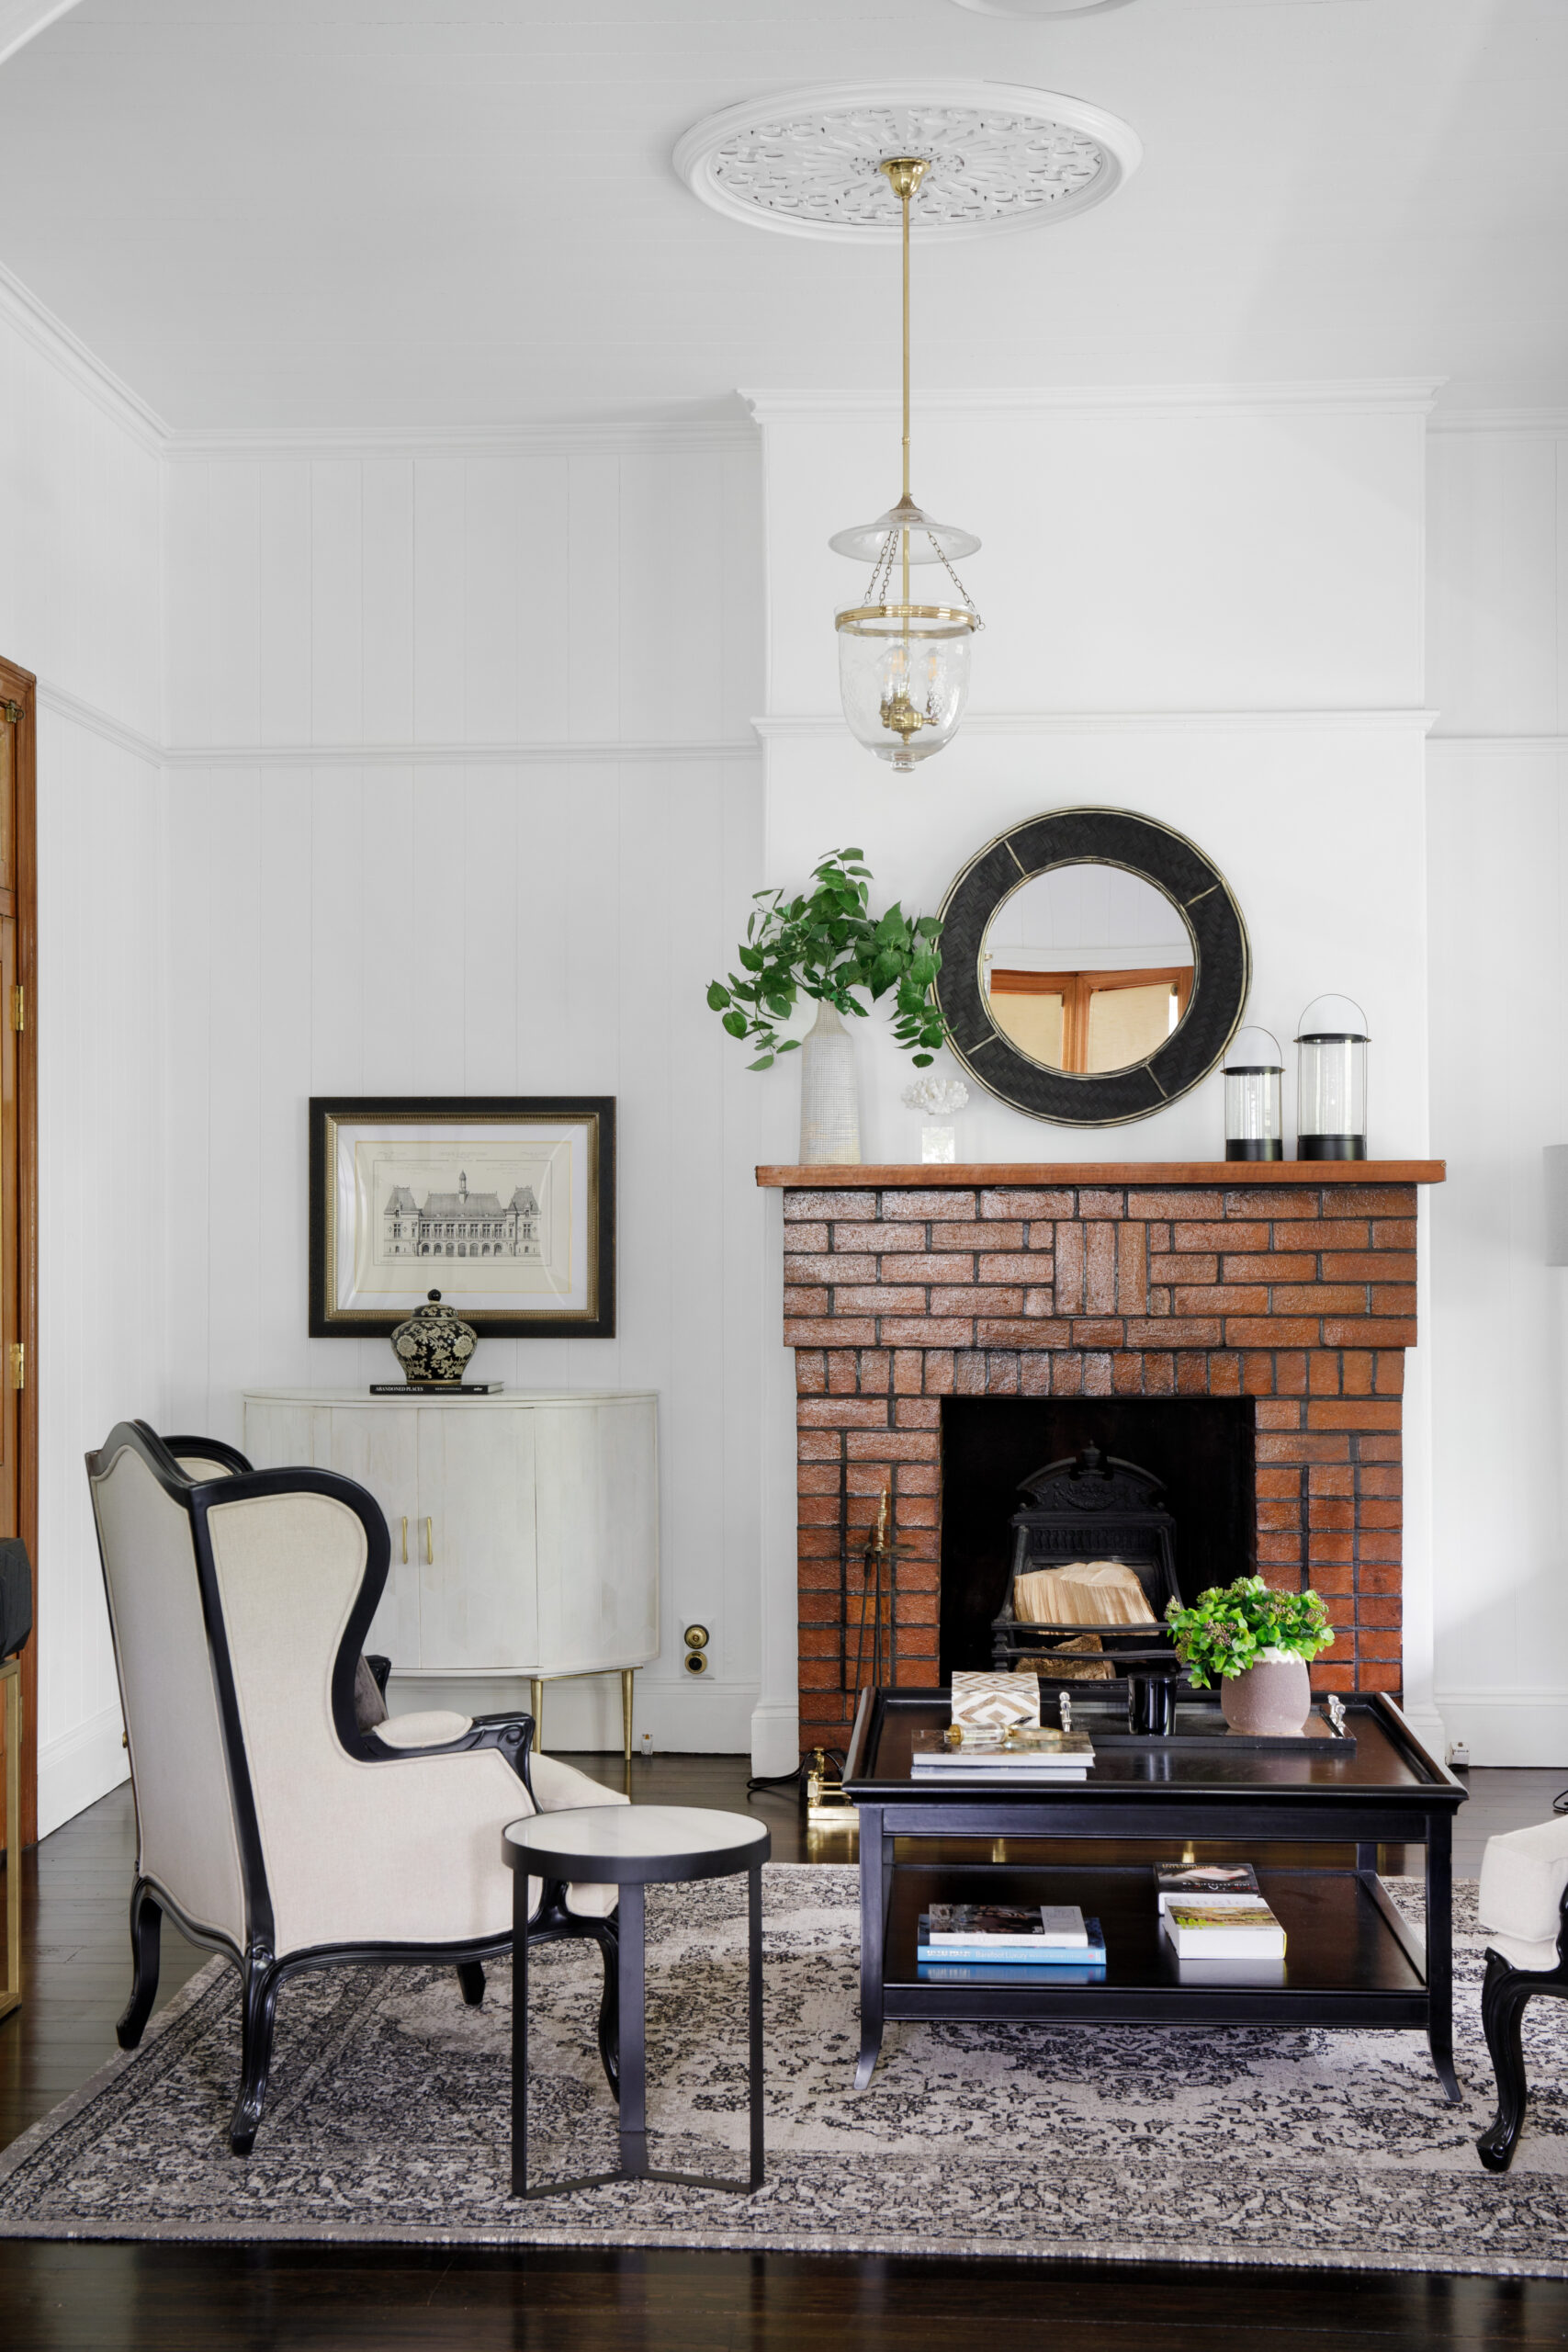 Seating area in a white room with a brick fireplace.